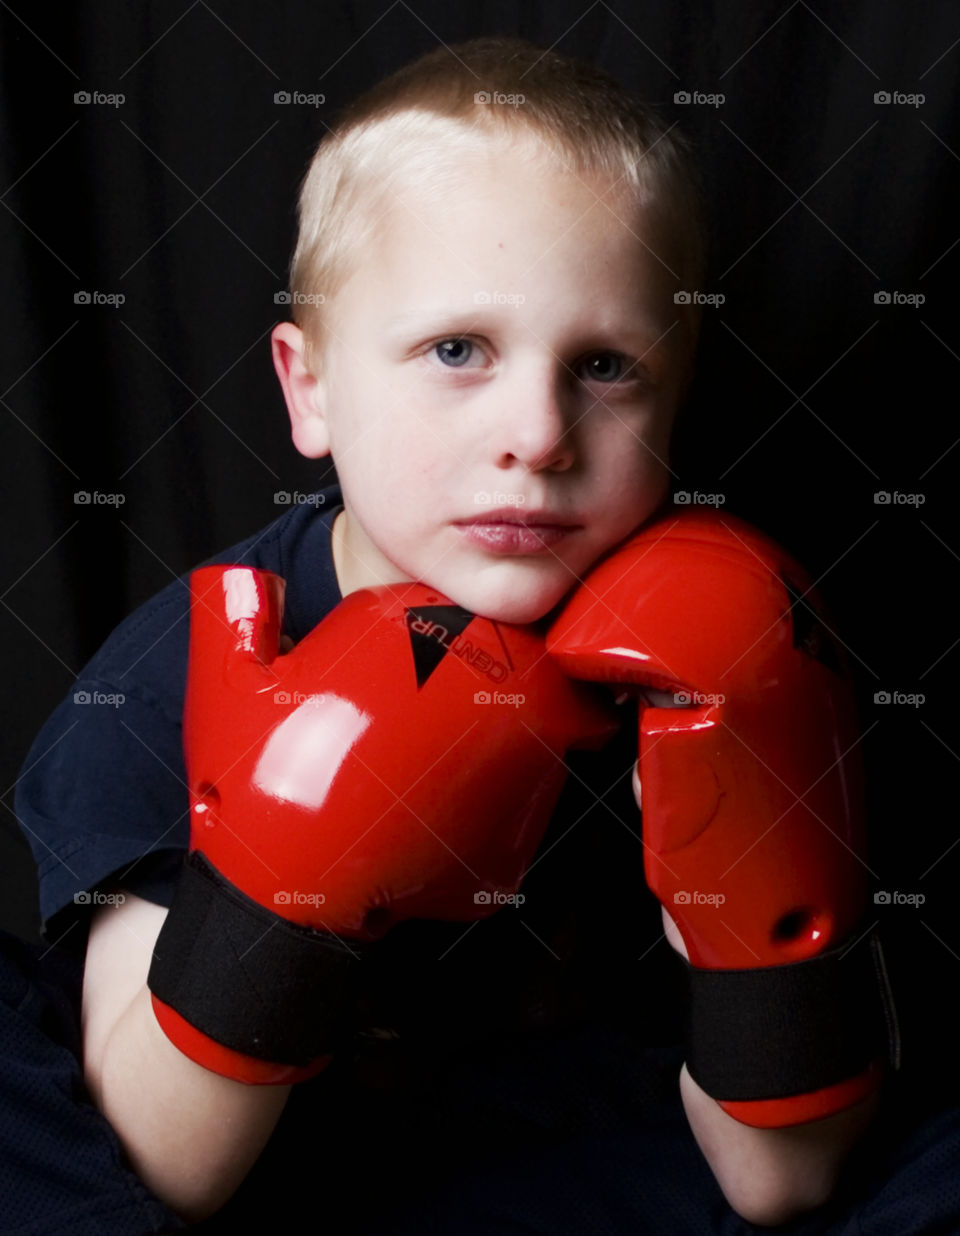 Sparring Partner. A child puts on sparring gear